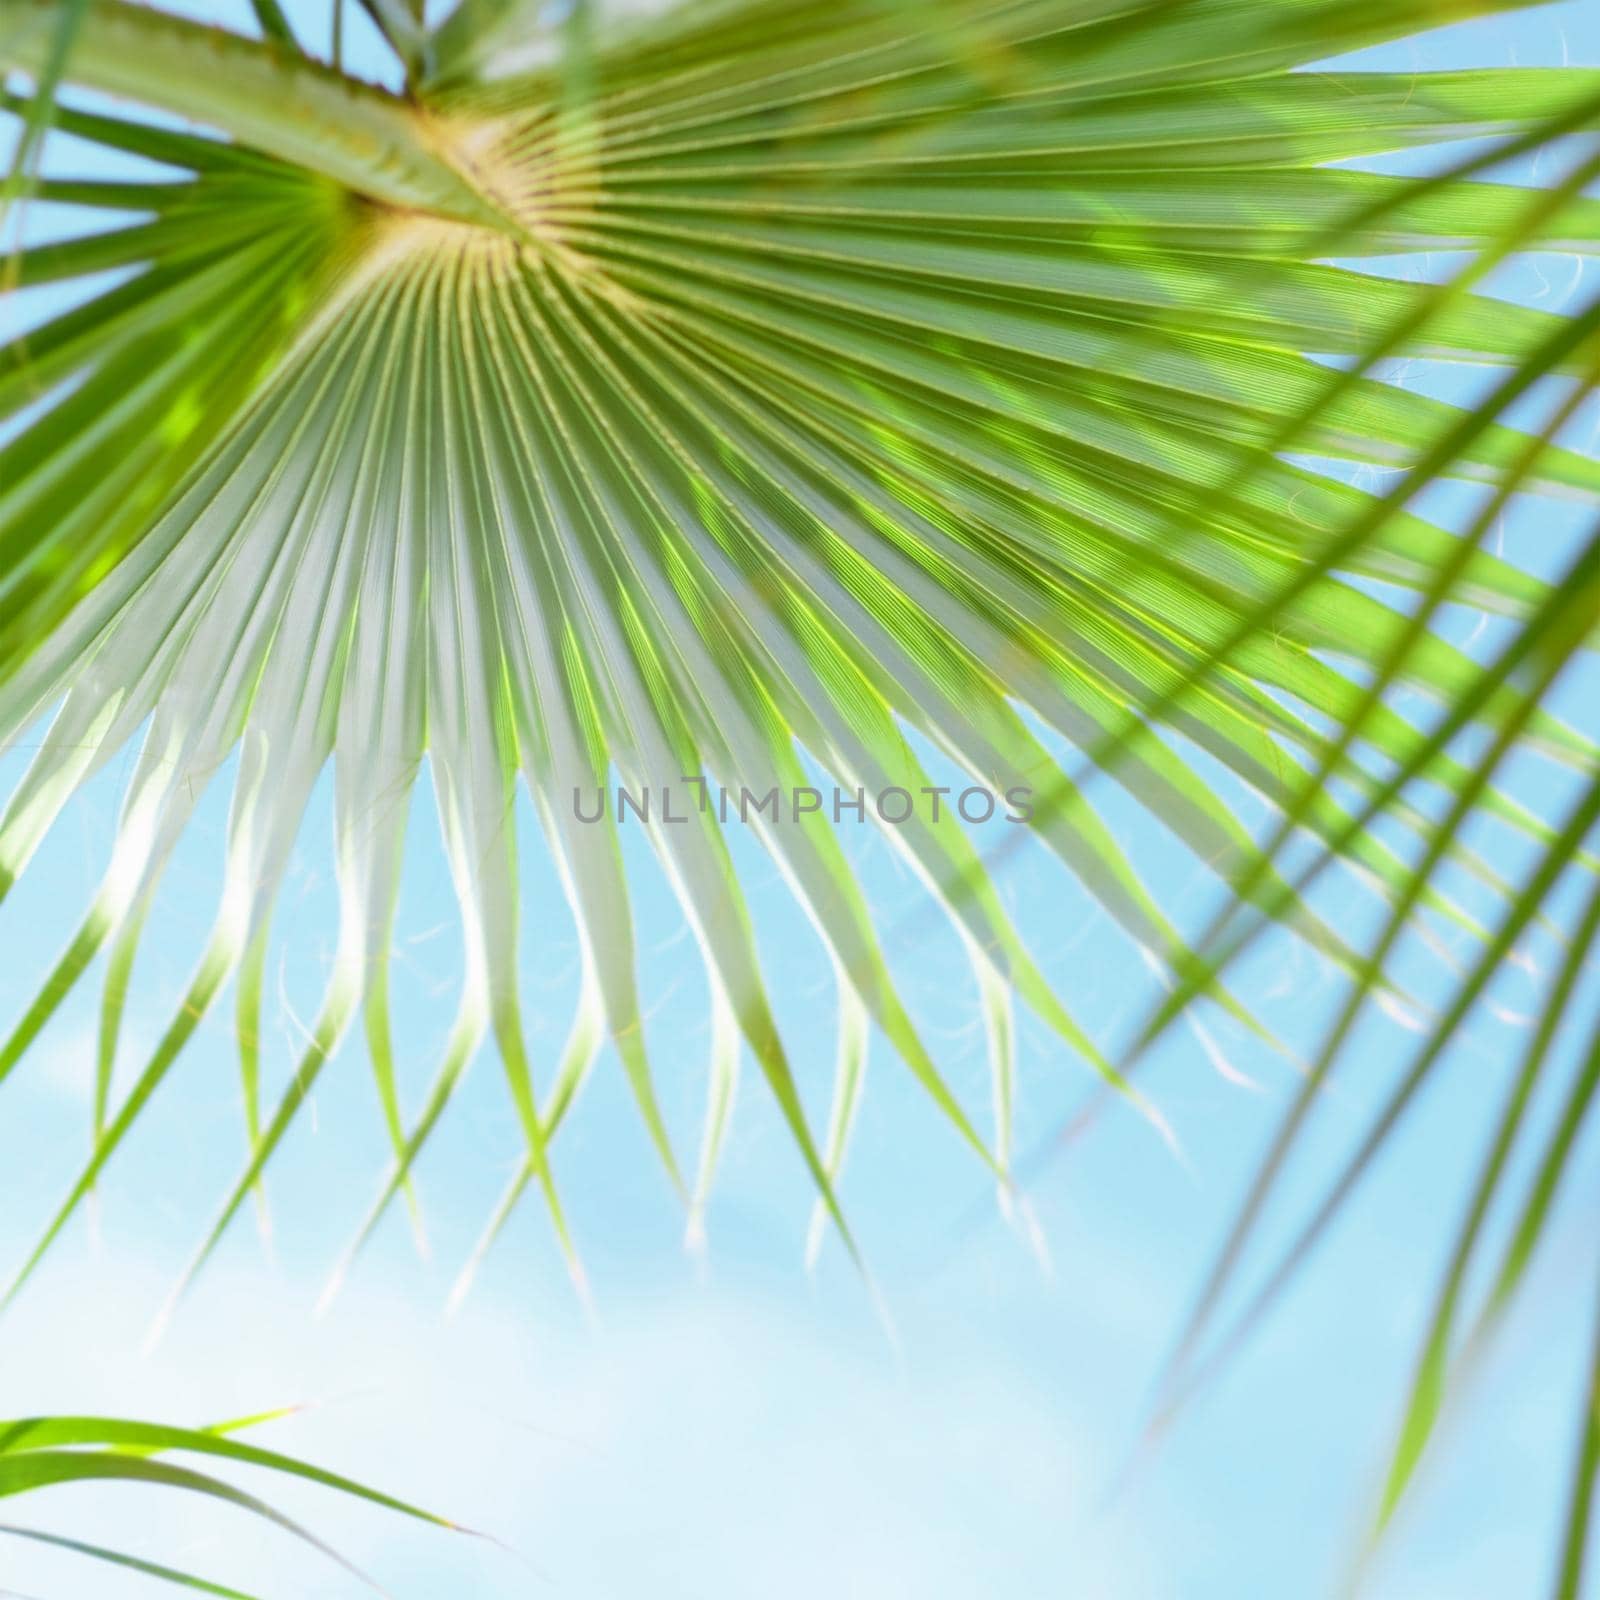 palm tree and blue sky - travel, exotic and tropical backgrounds styled concept